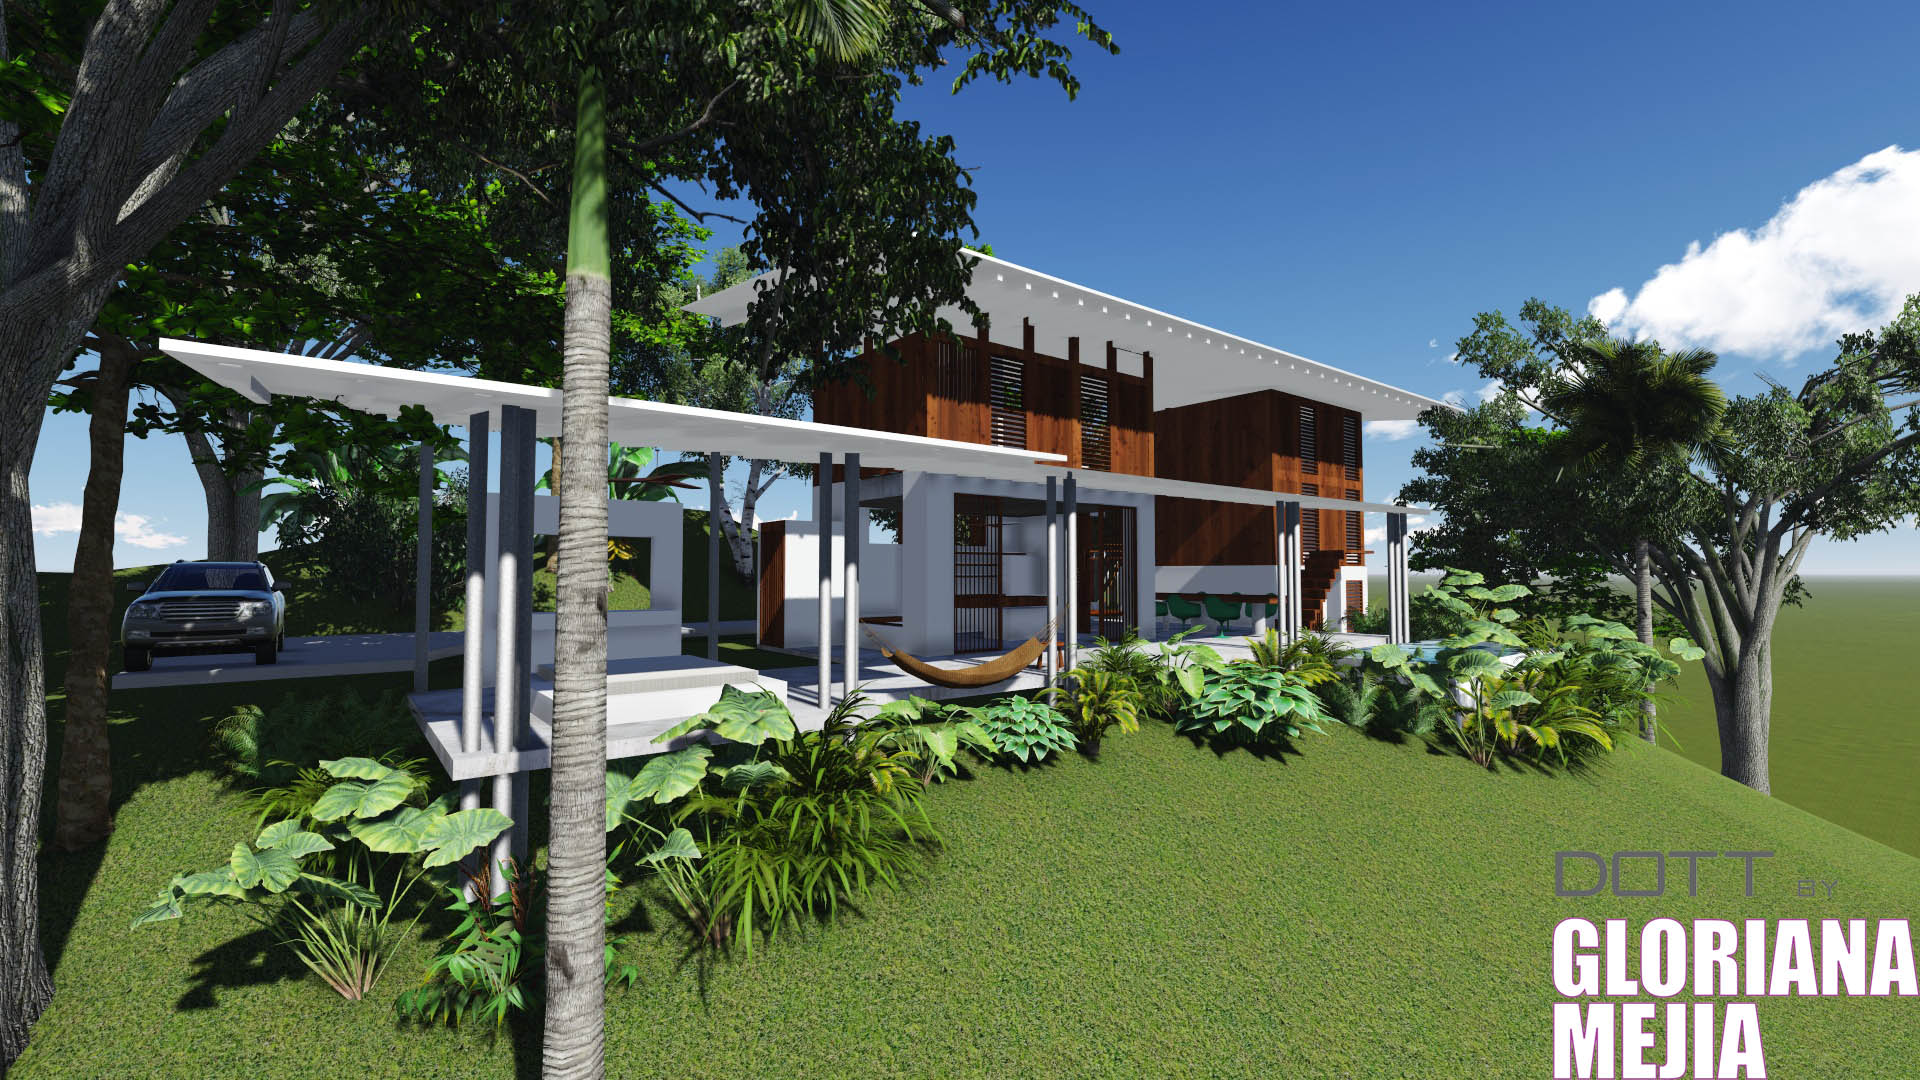  House  Plans  For Tropical  Countries  Modern  House 